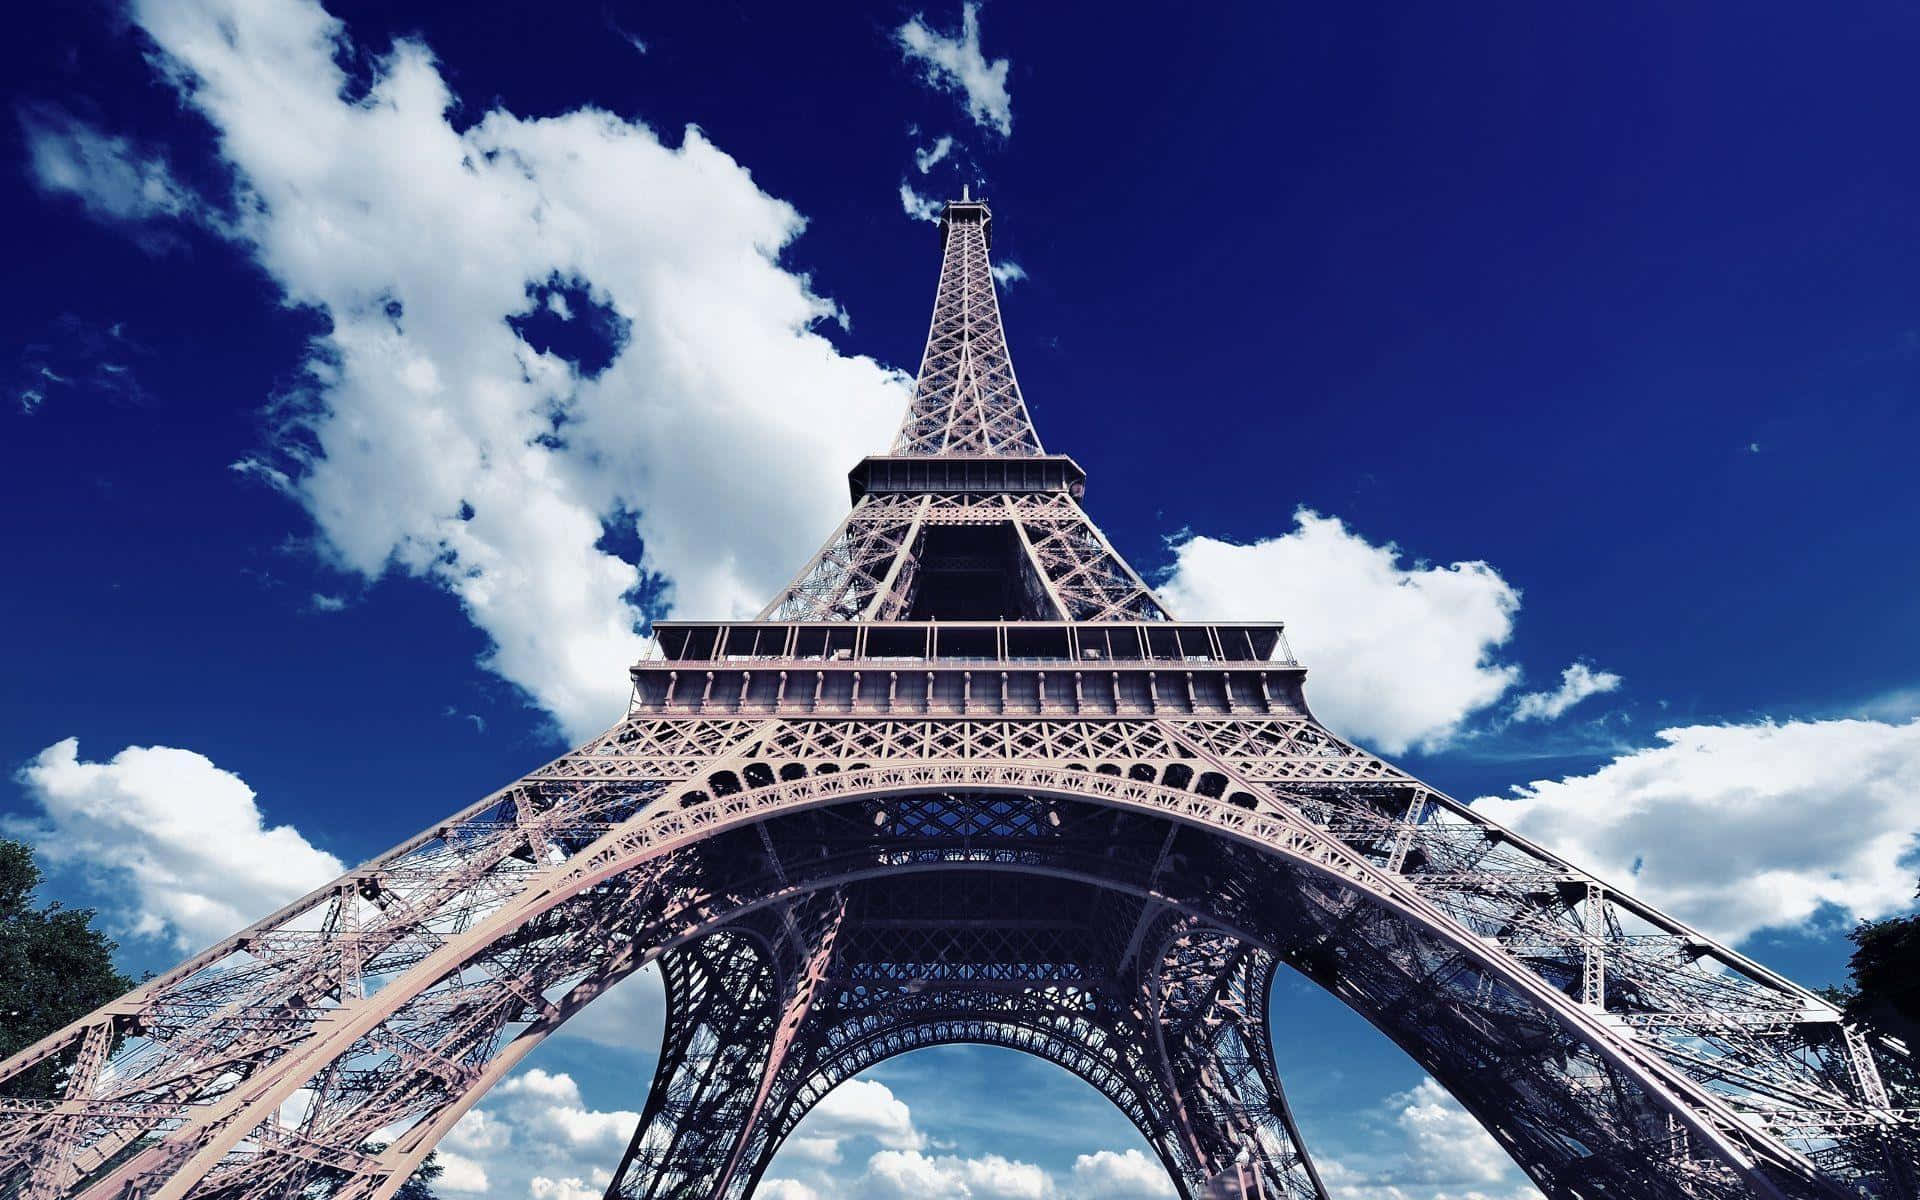 Standing tall and proud, the world famous Eiffel Tower in Paris